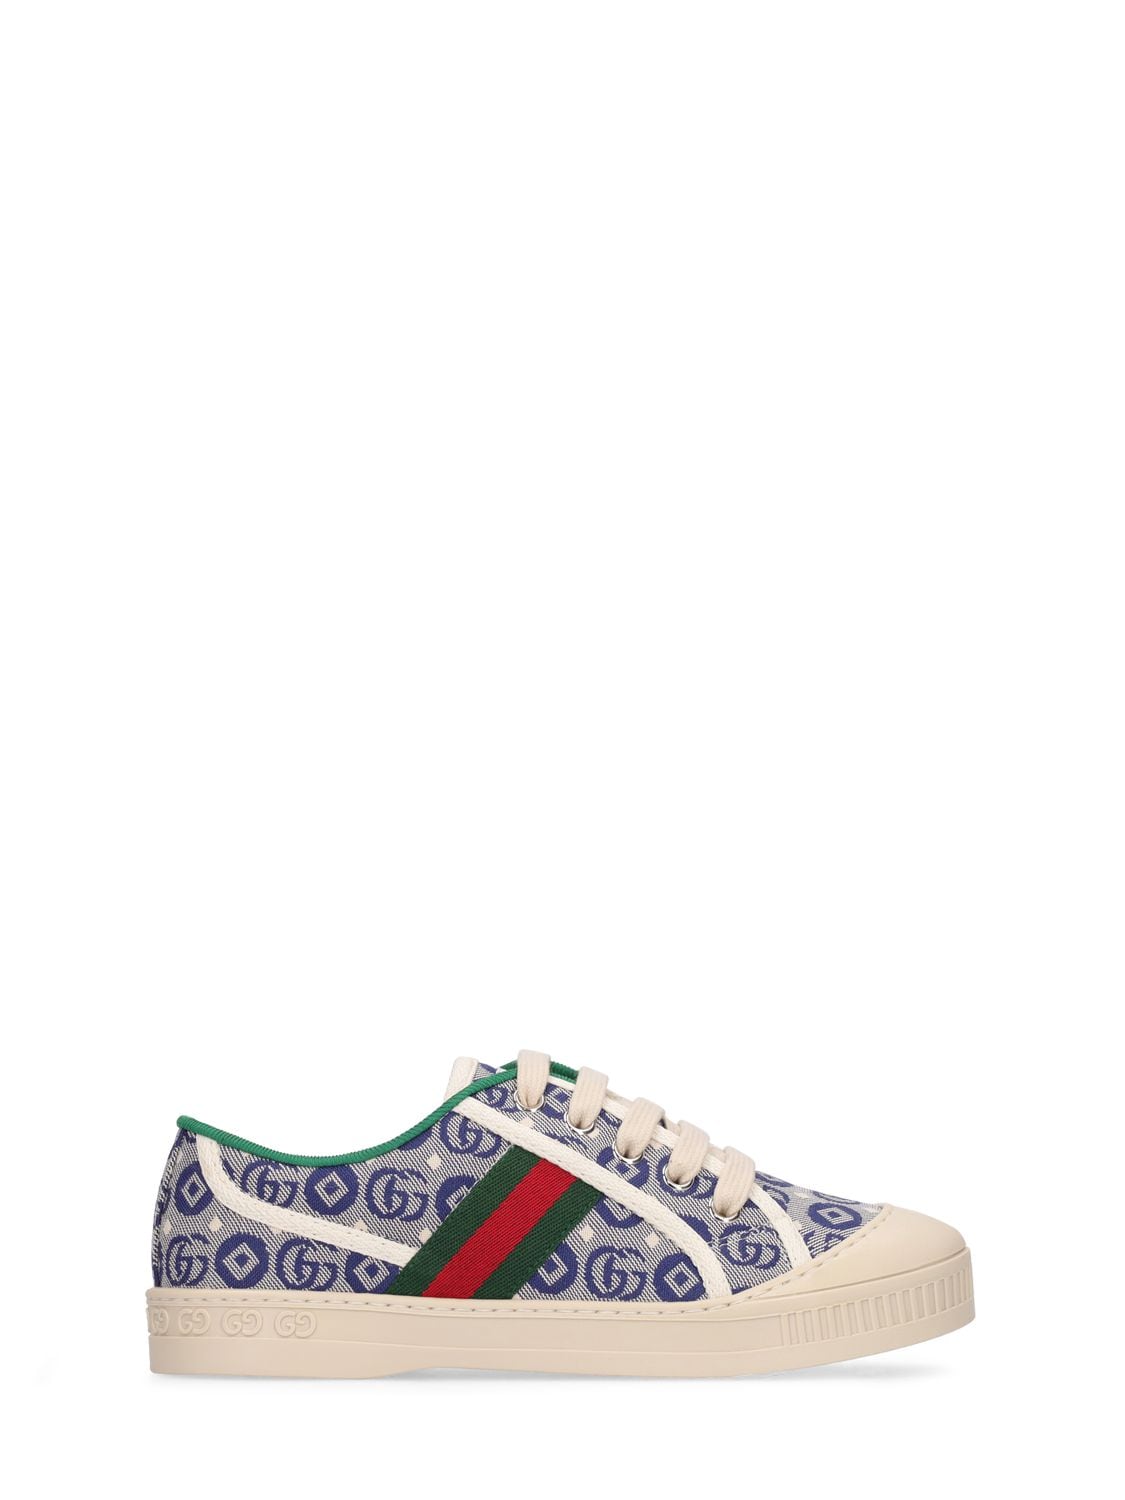 Gucci Kids' Tennis 1977 Label Sneakers In Blue,white